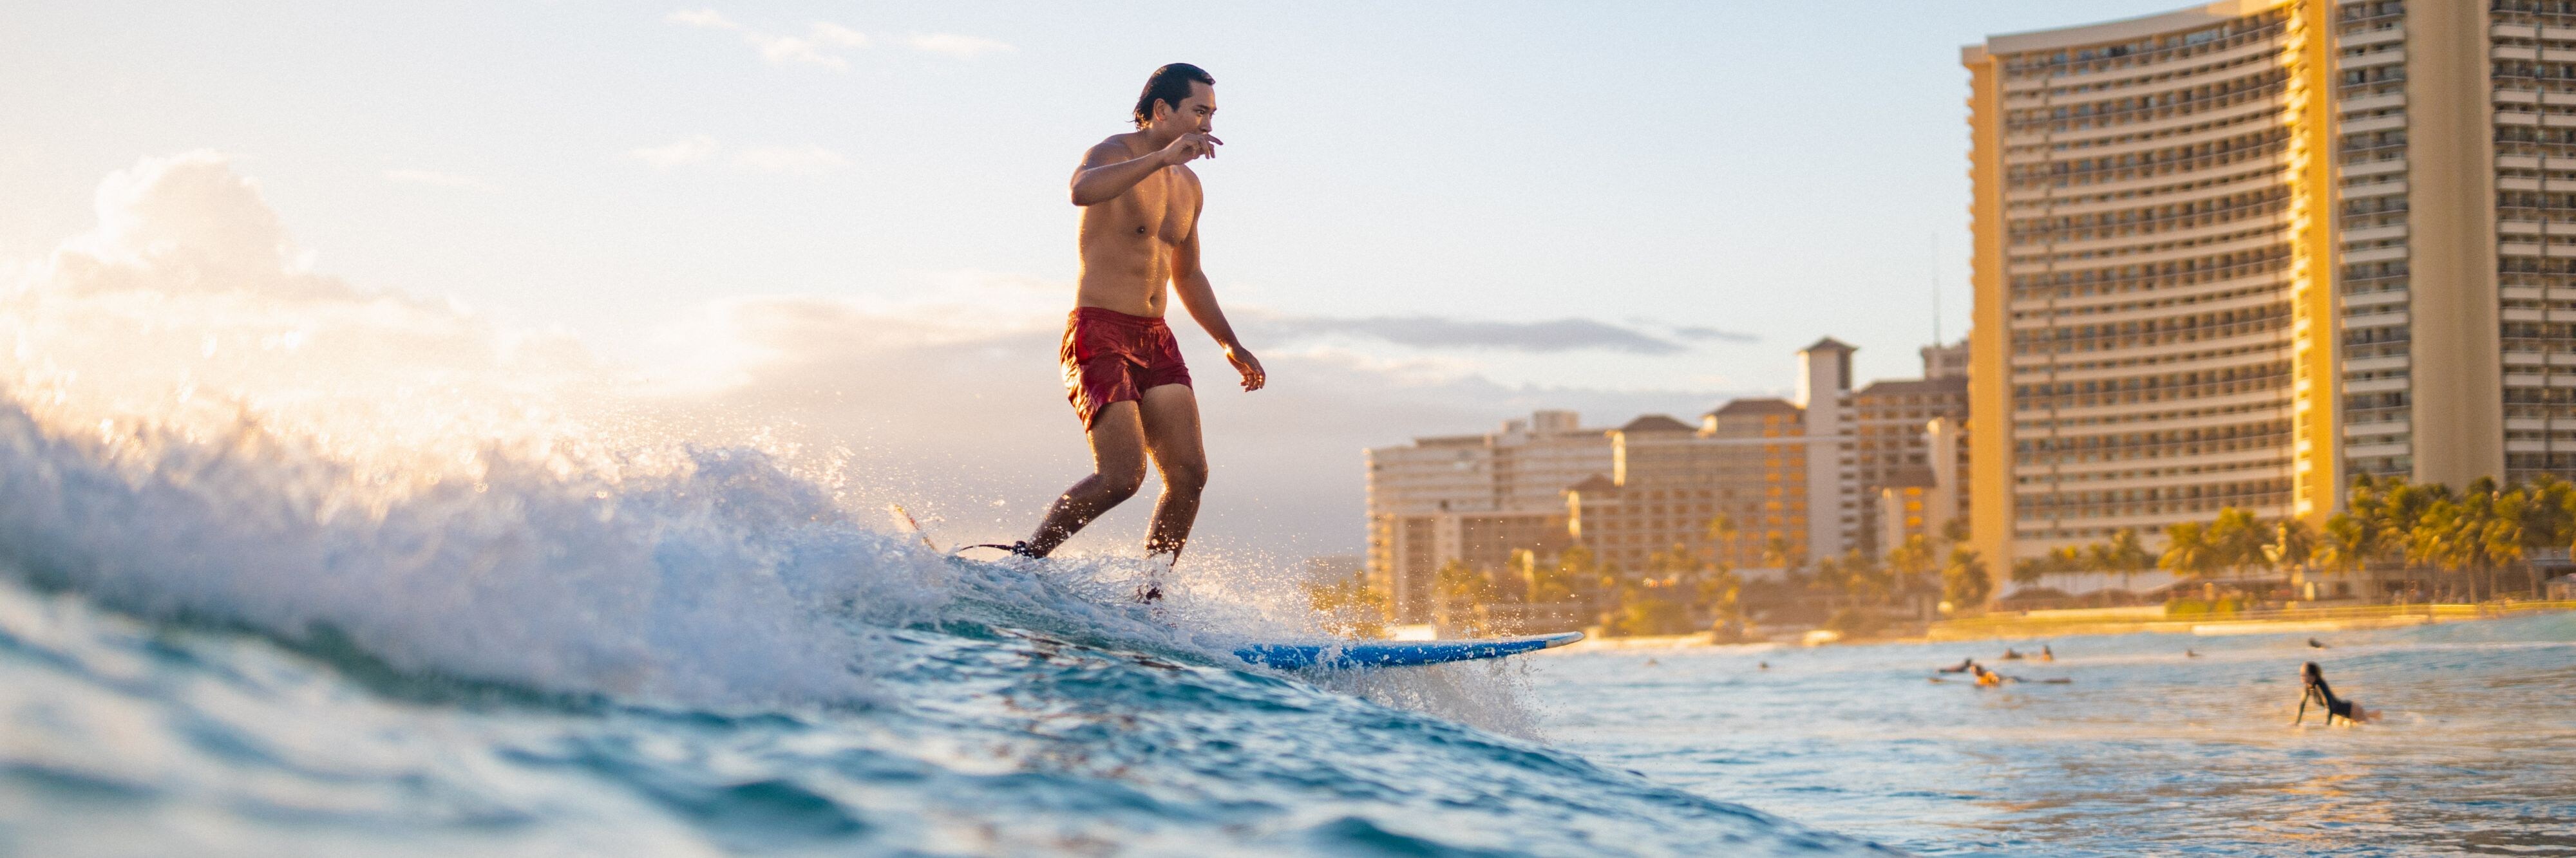 Ride the waves of the world-famous Waikiki Beach